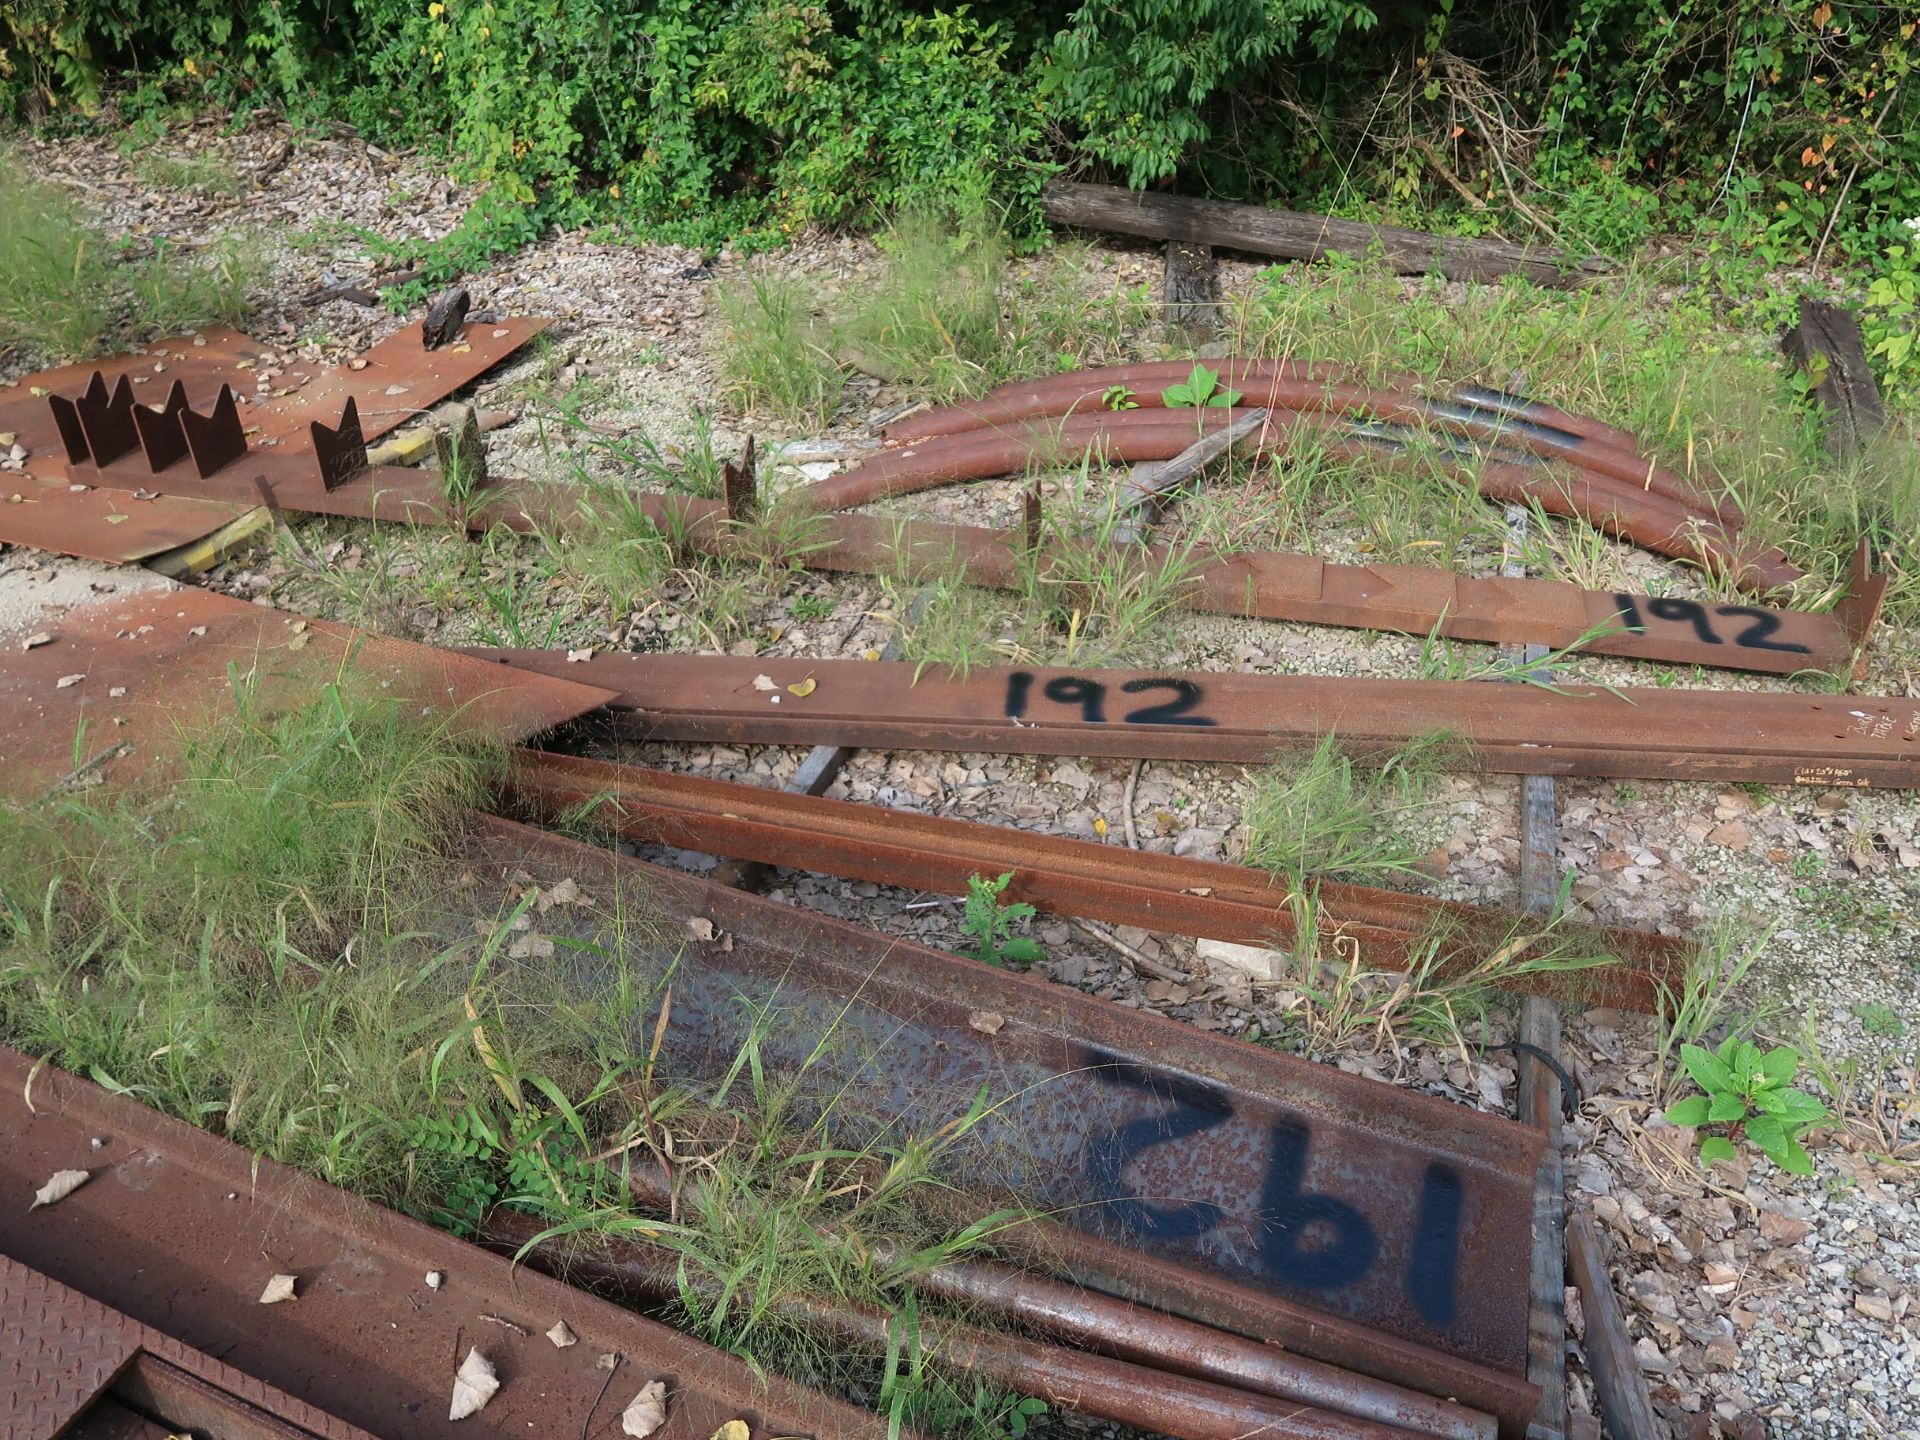 (LOT) MISC. STEEL PLATE ON GROUND W/ MISC. SCRAP STEEL AT END OF ROW (BLACK PAINT) - Image 6 of 6